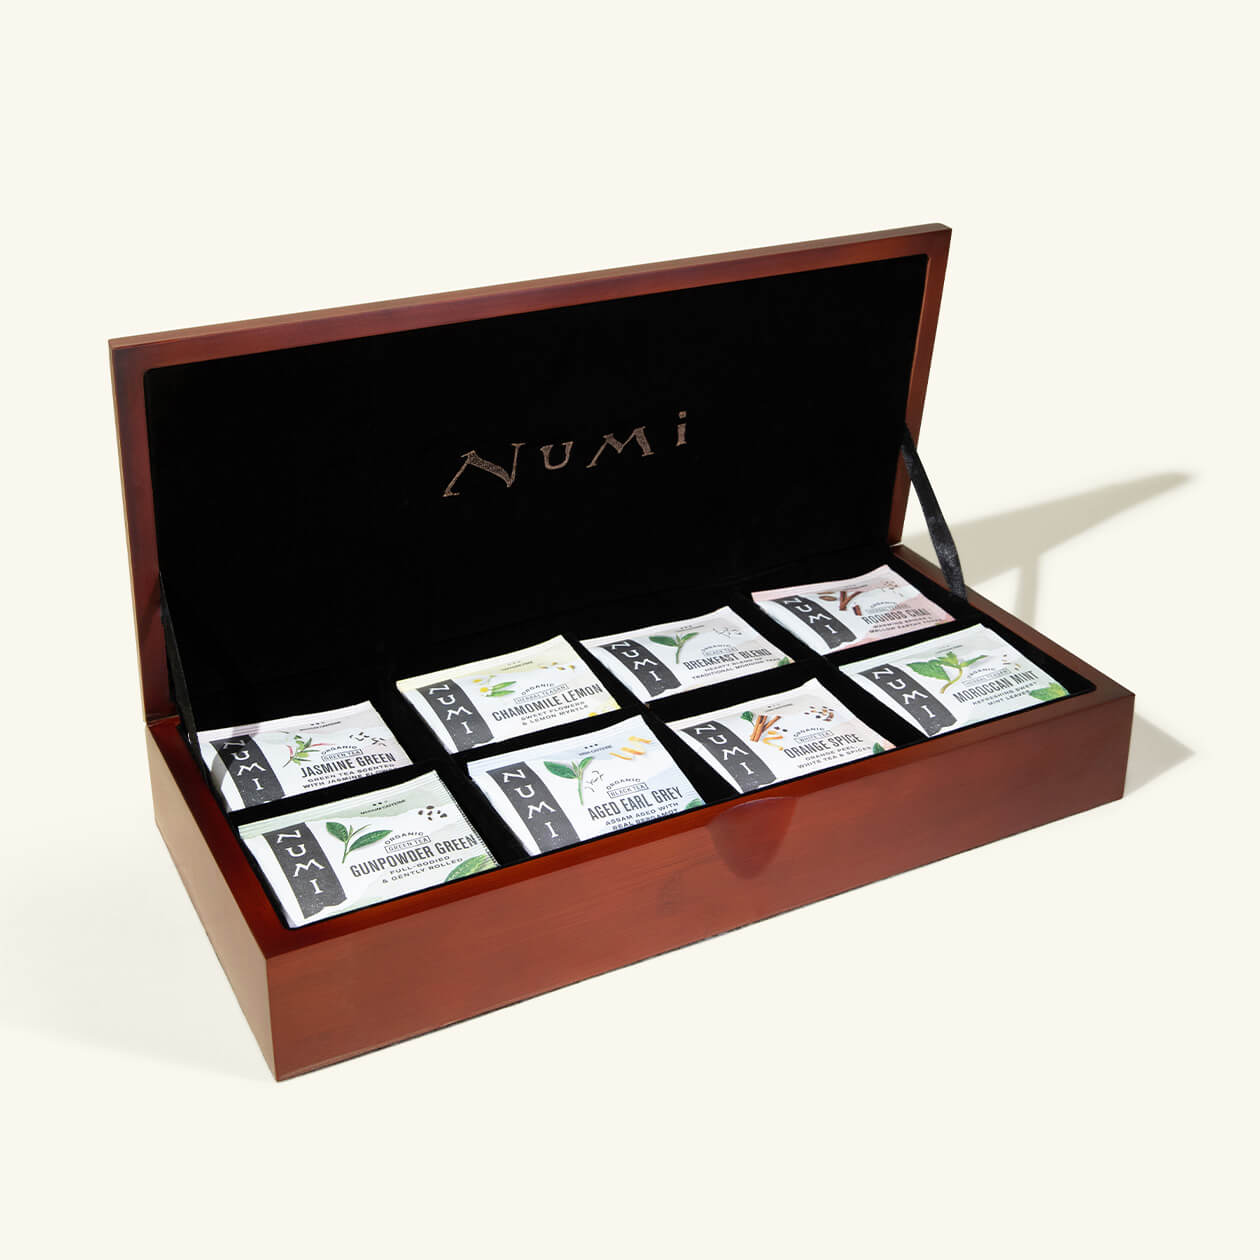 Numi's most elegant tea chests are velvet lined with a mahogany finish and hold 8 varieties of tea bag.